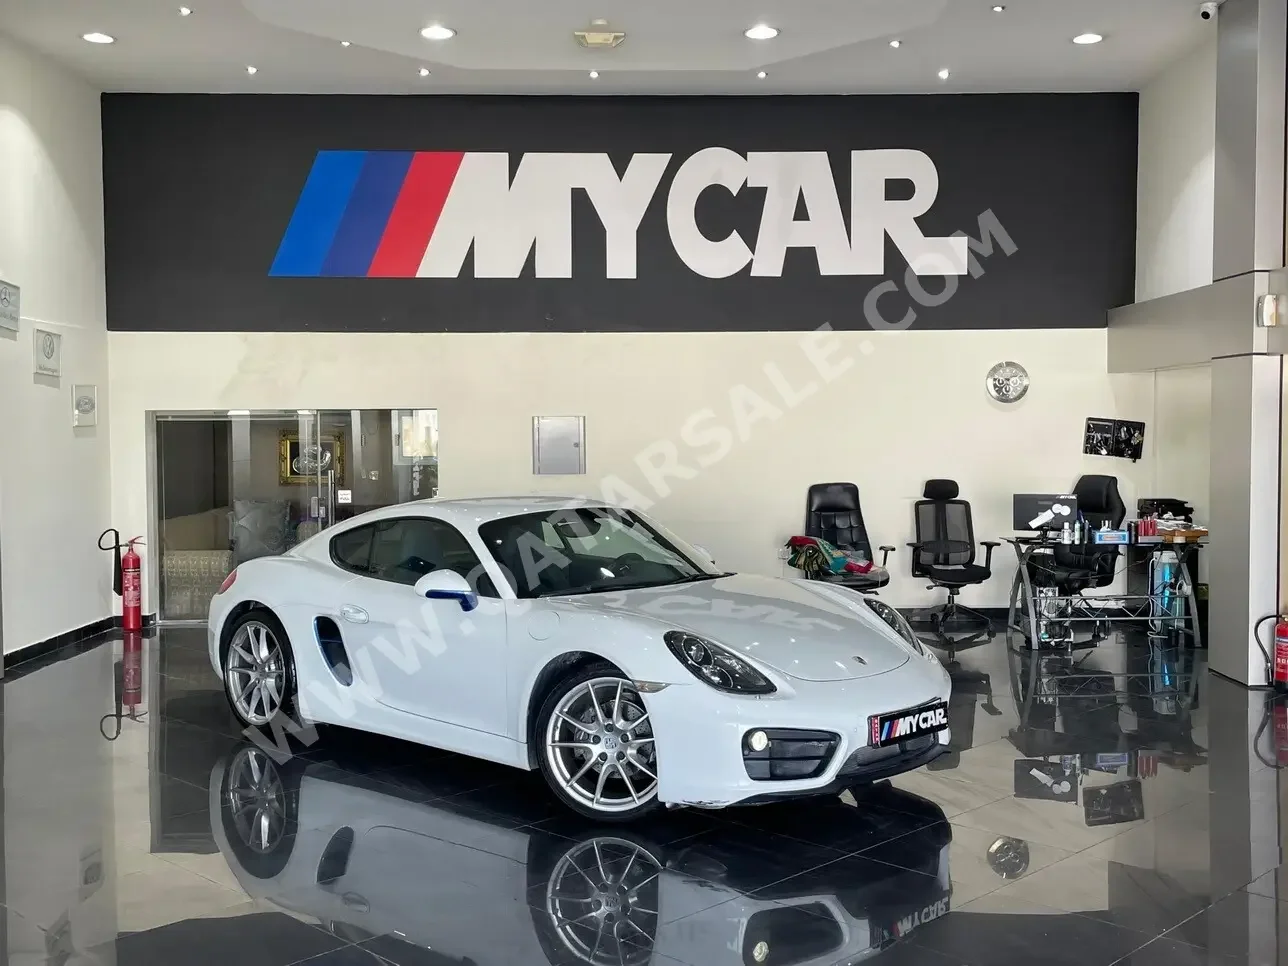 Porsche  Cayman  2015  Automatic  75,000 Km  6 Cylinder  Rear Wheel Drive (RWD)  Coupe / Sport  White